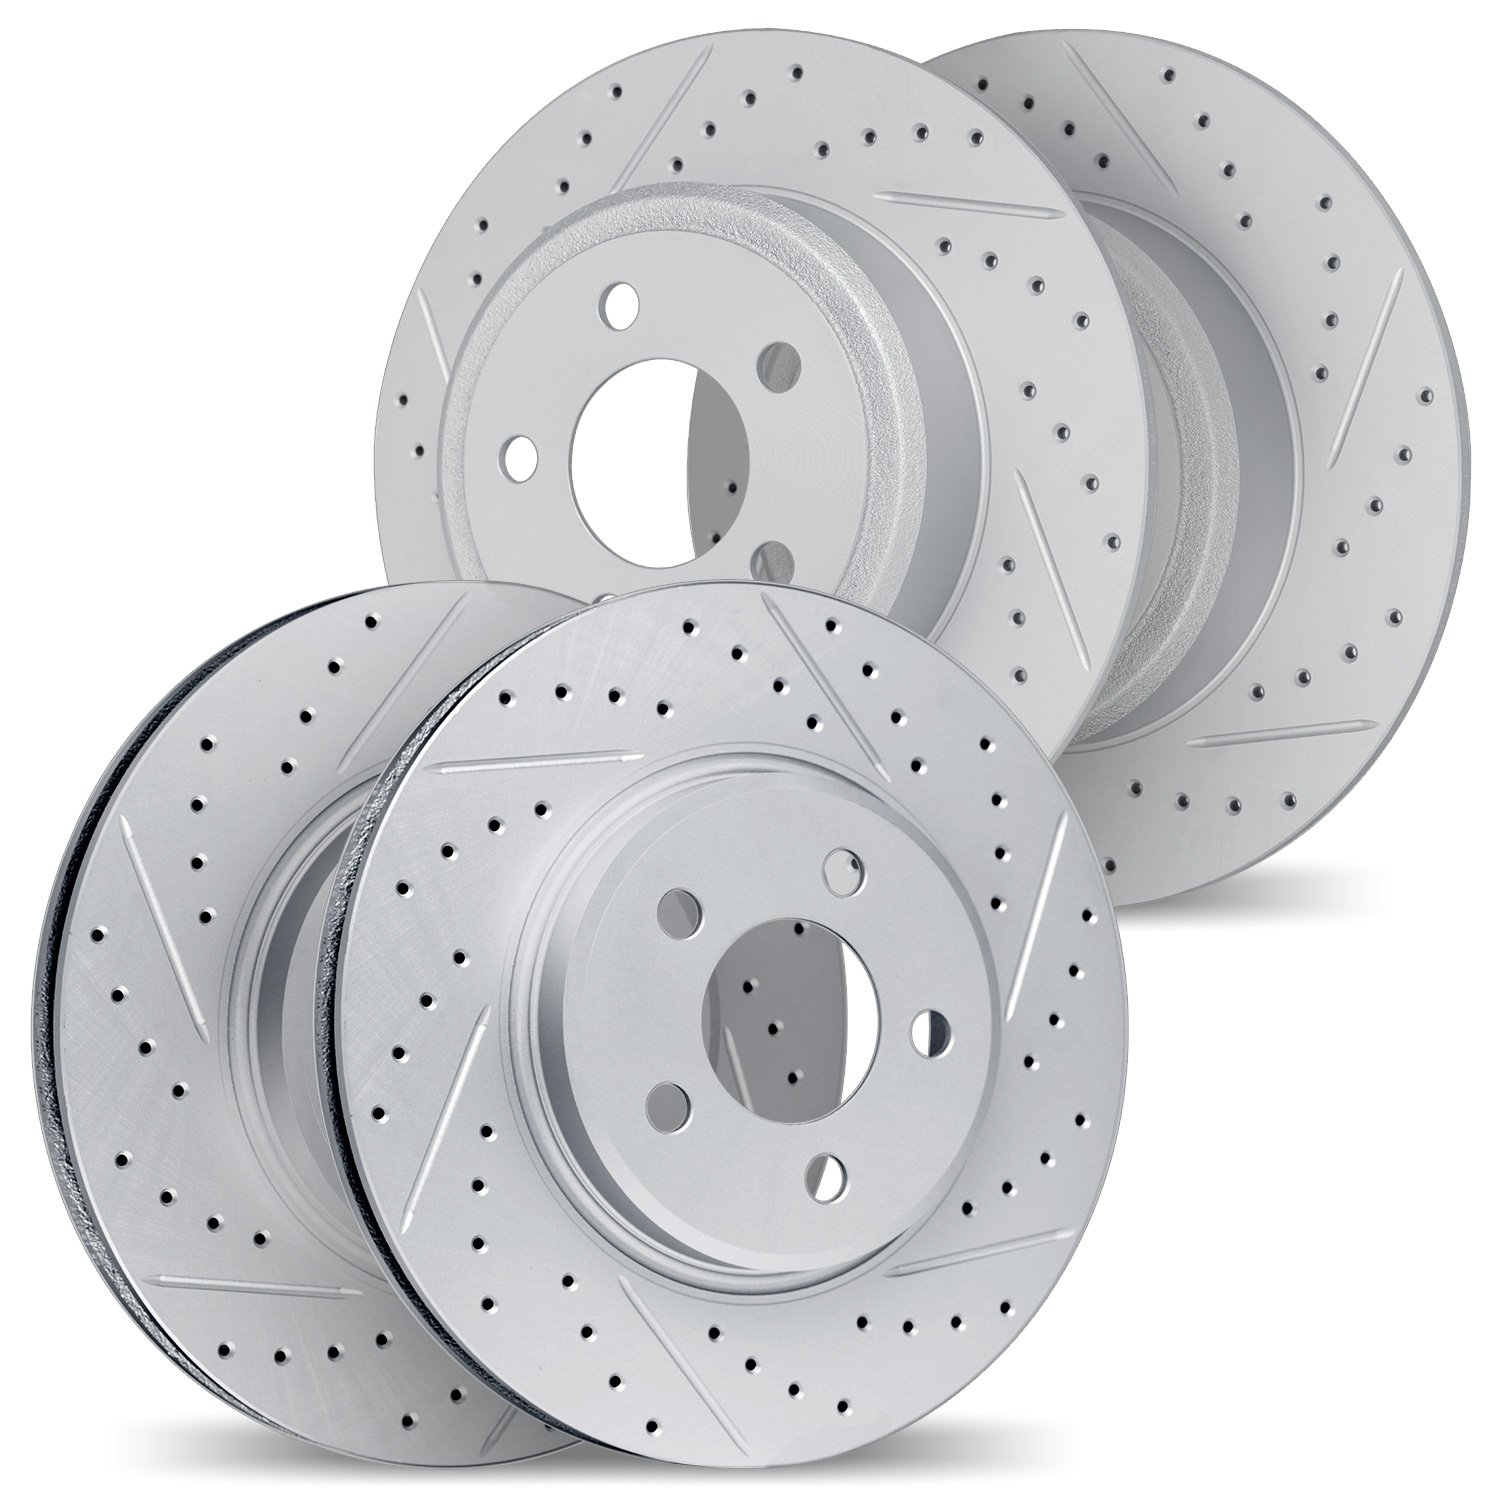 2004-31072 Geoperformance Drilled/Slotted Brake Rotors, 1996-2002 BMW, Position: Front and Rear